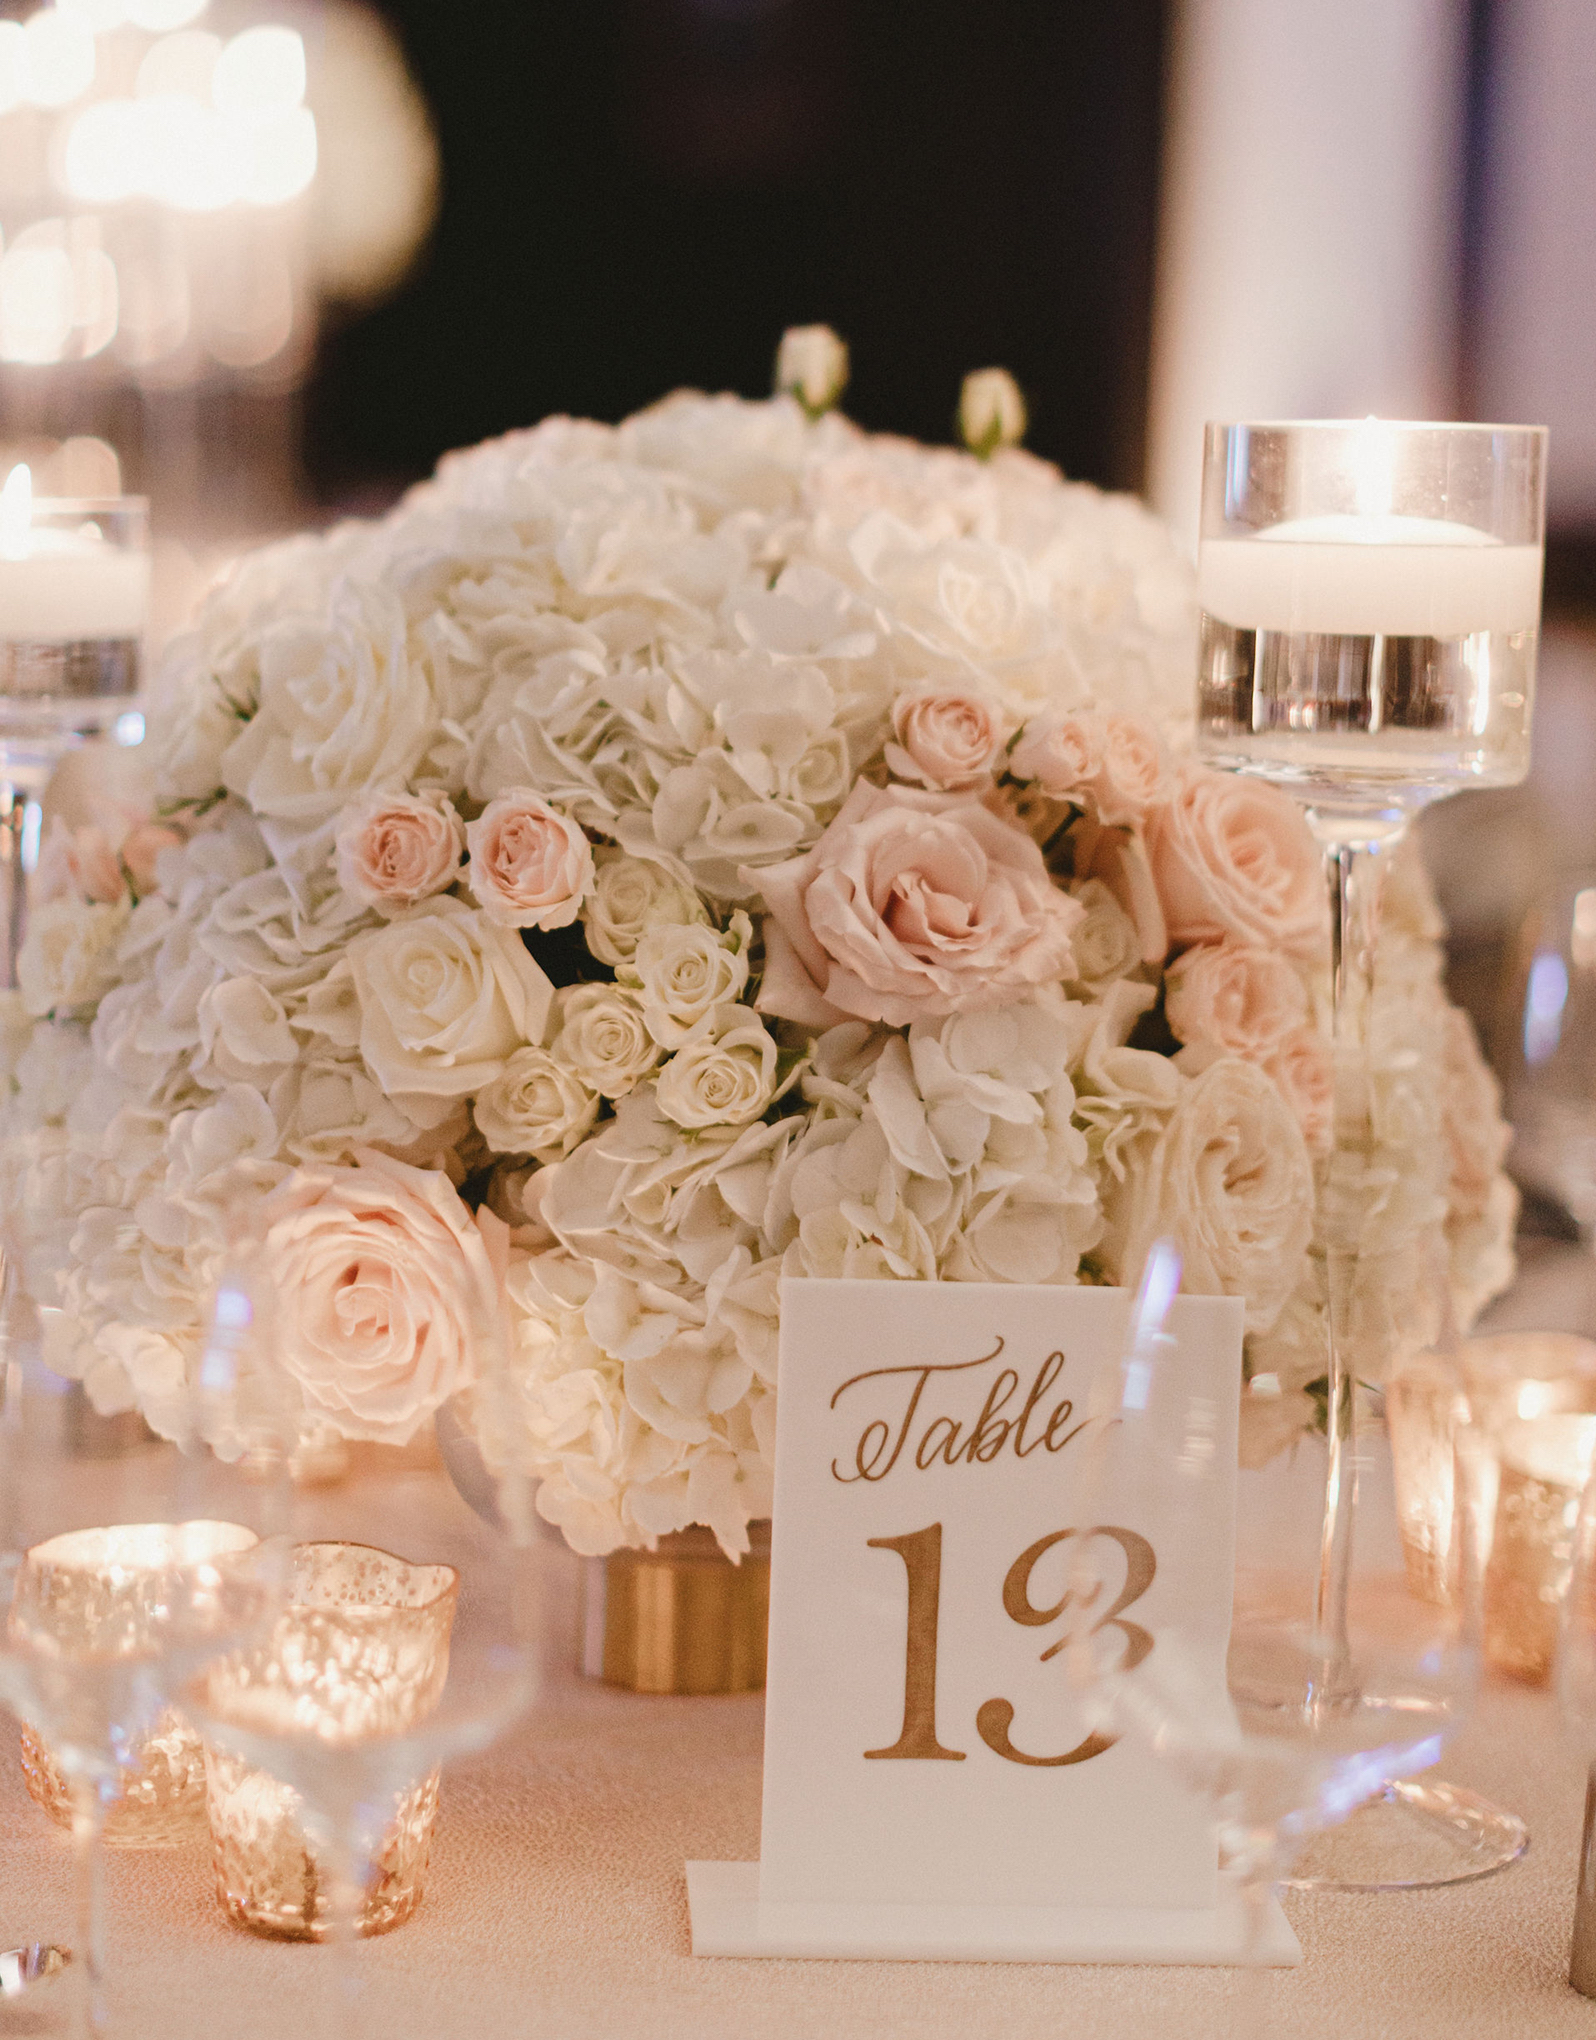 A wedding ceterpiece is filled with white and pink flowers and surrounded by candles and gold accents for a romantic ballroom wedding in Houston.